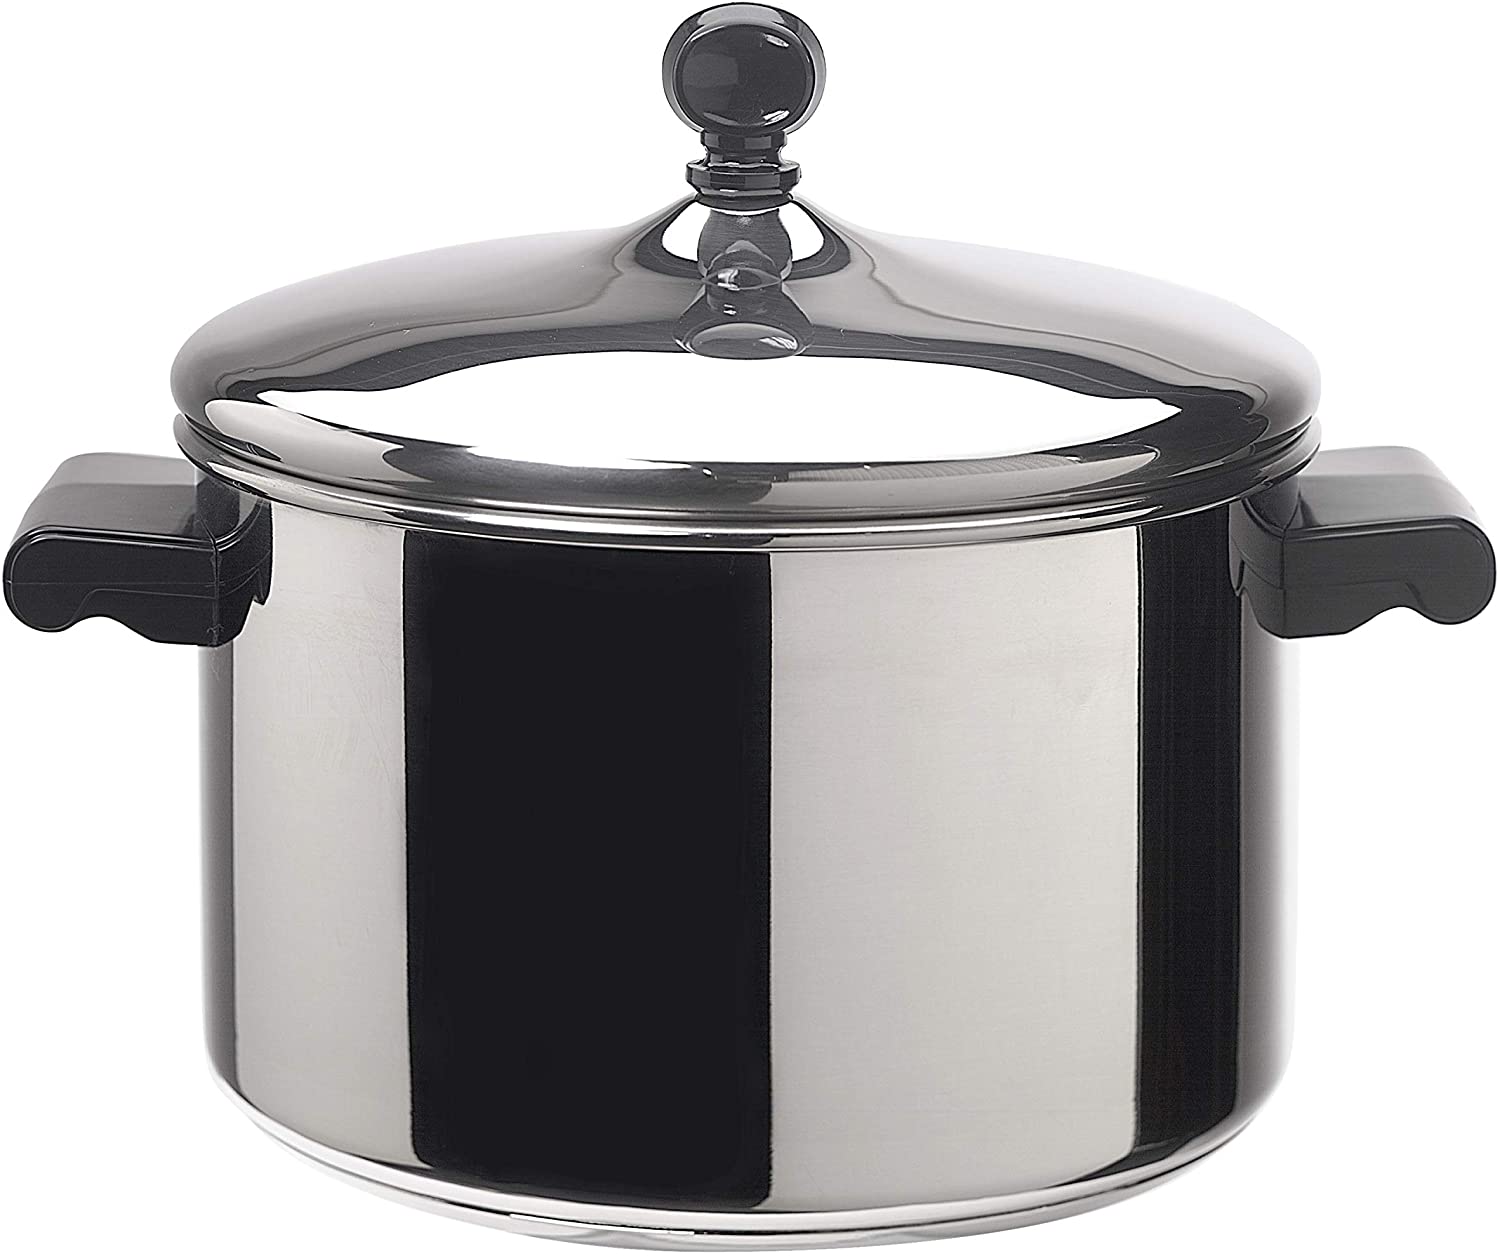 Farberware stainless steel pot for cooking rice